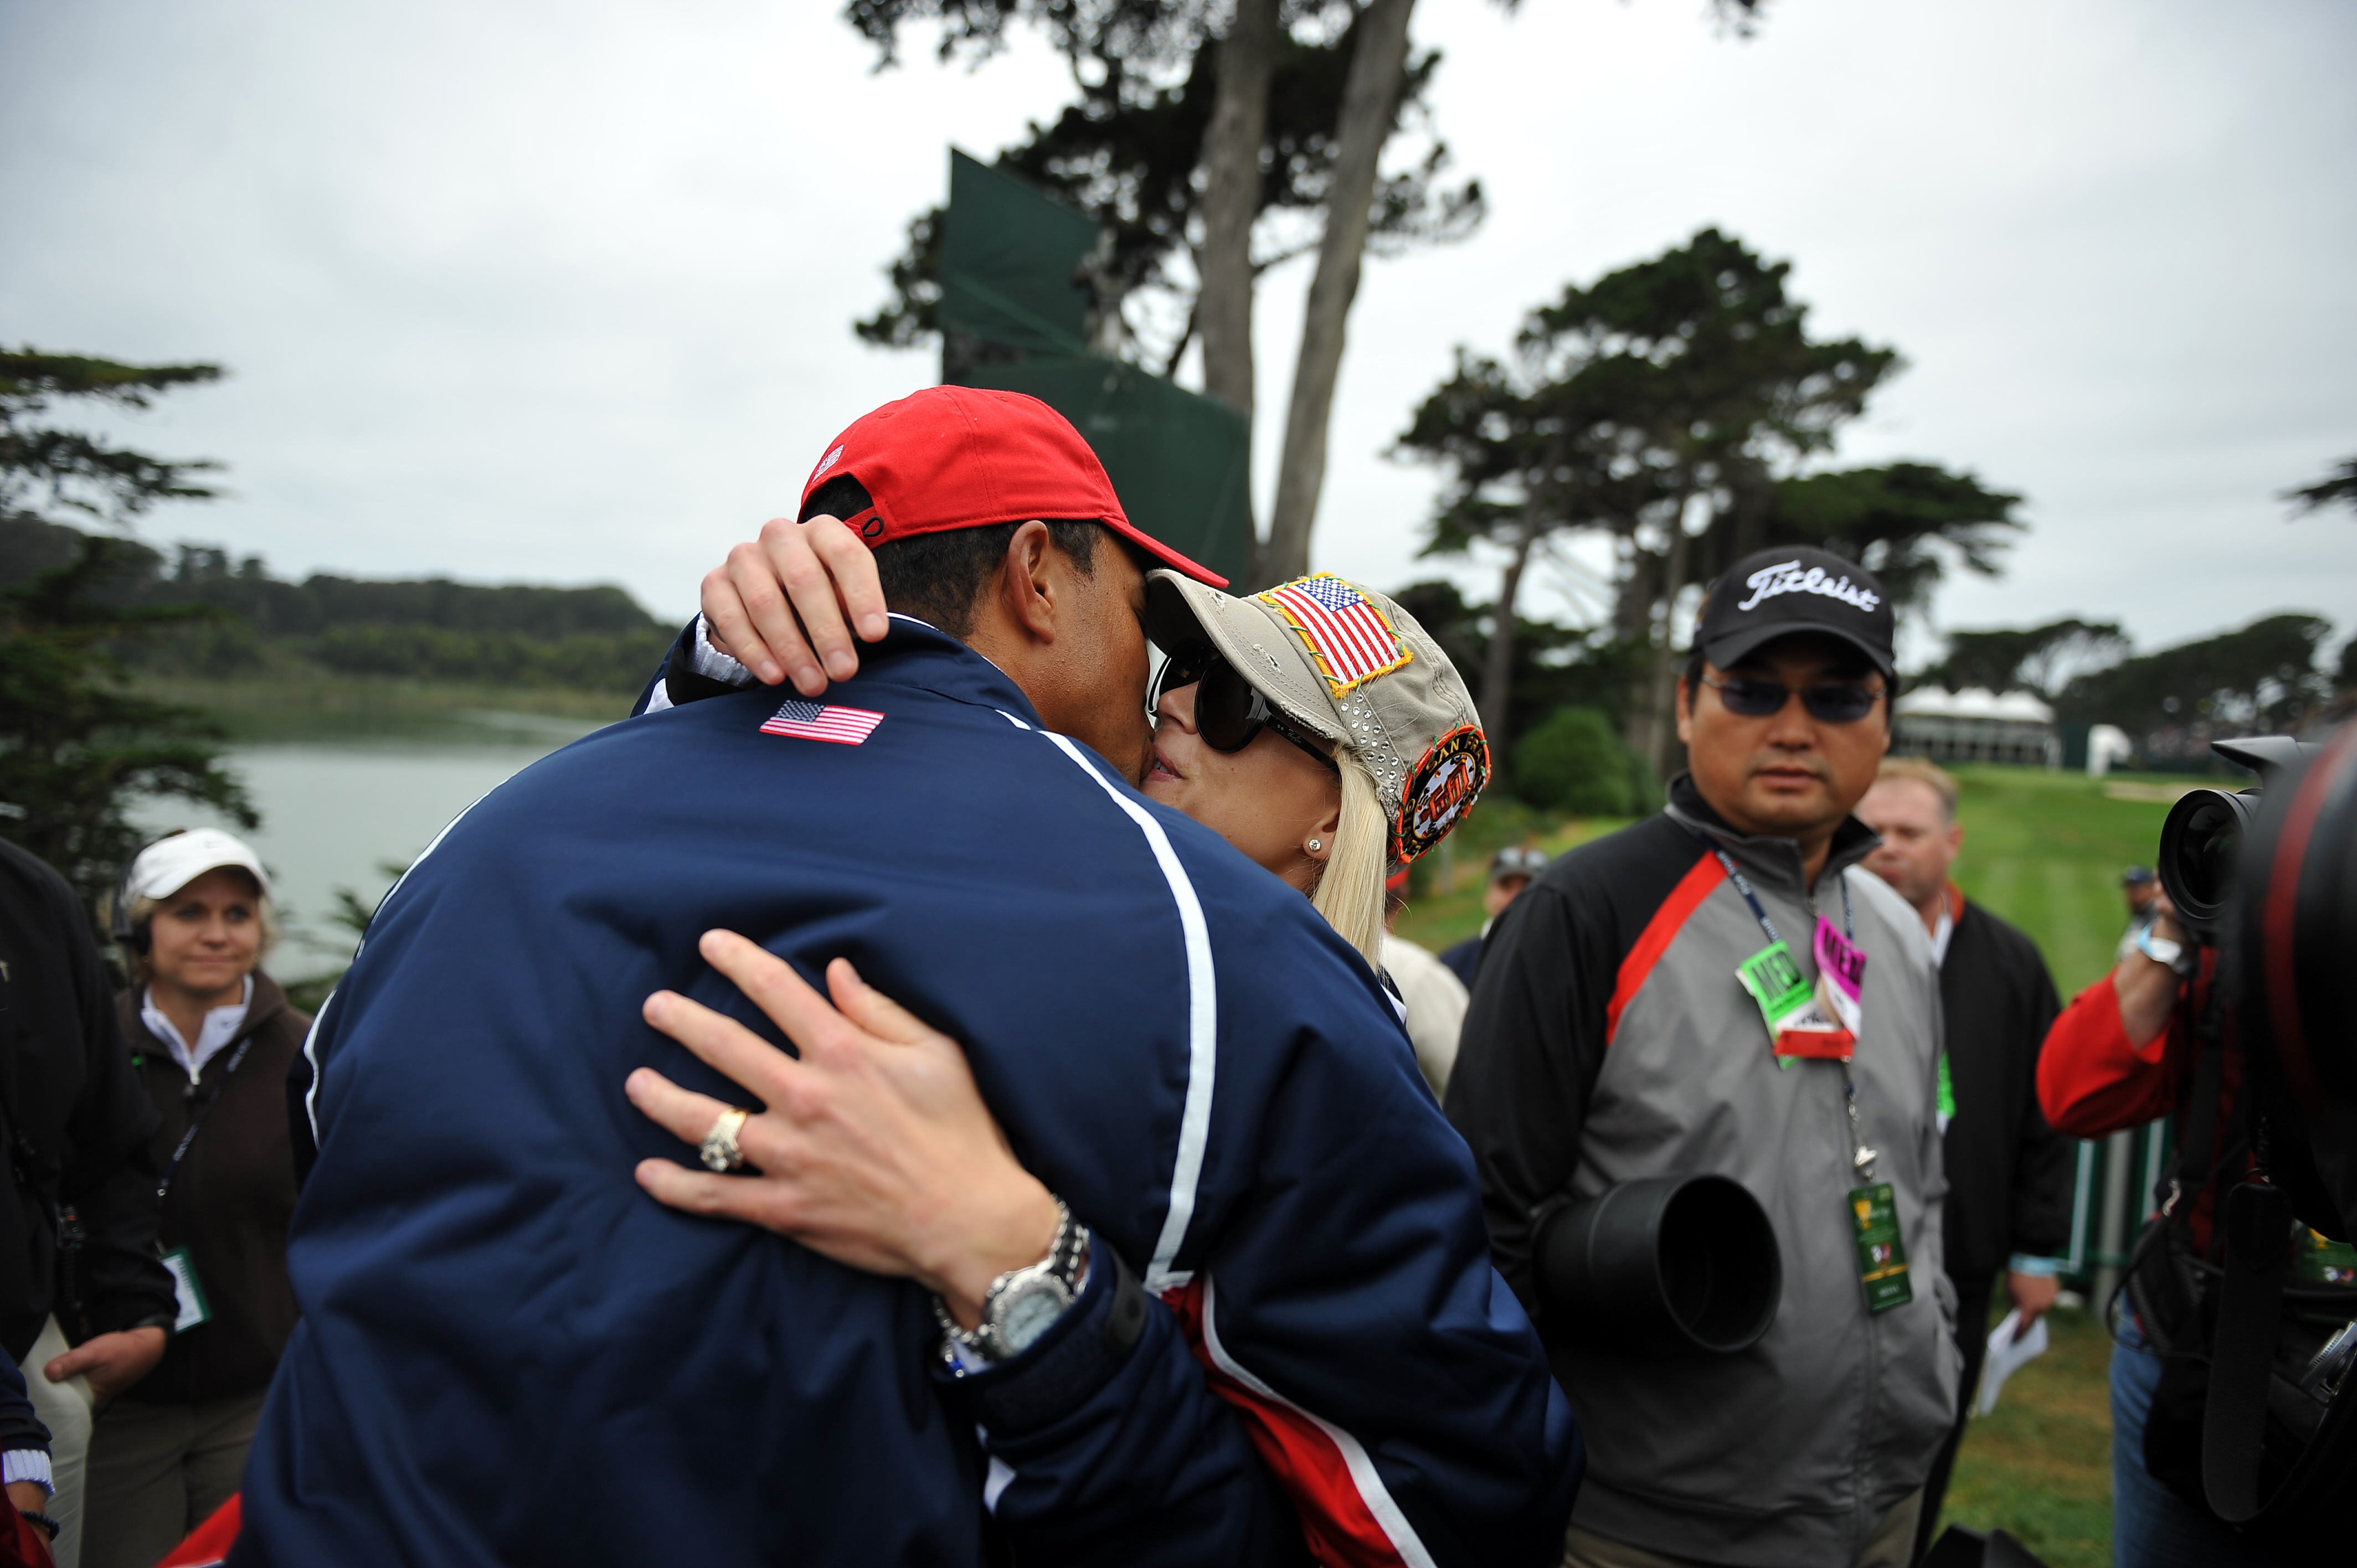 Golf legend Tiger Woods gets a kiss from his wife Elin Nordegren in 2009